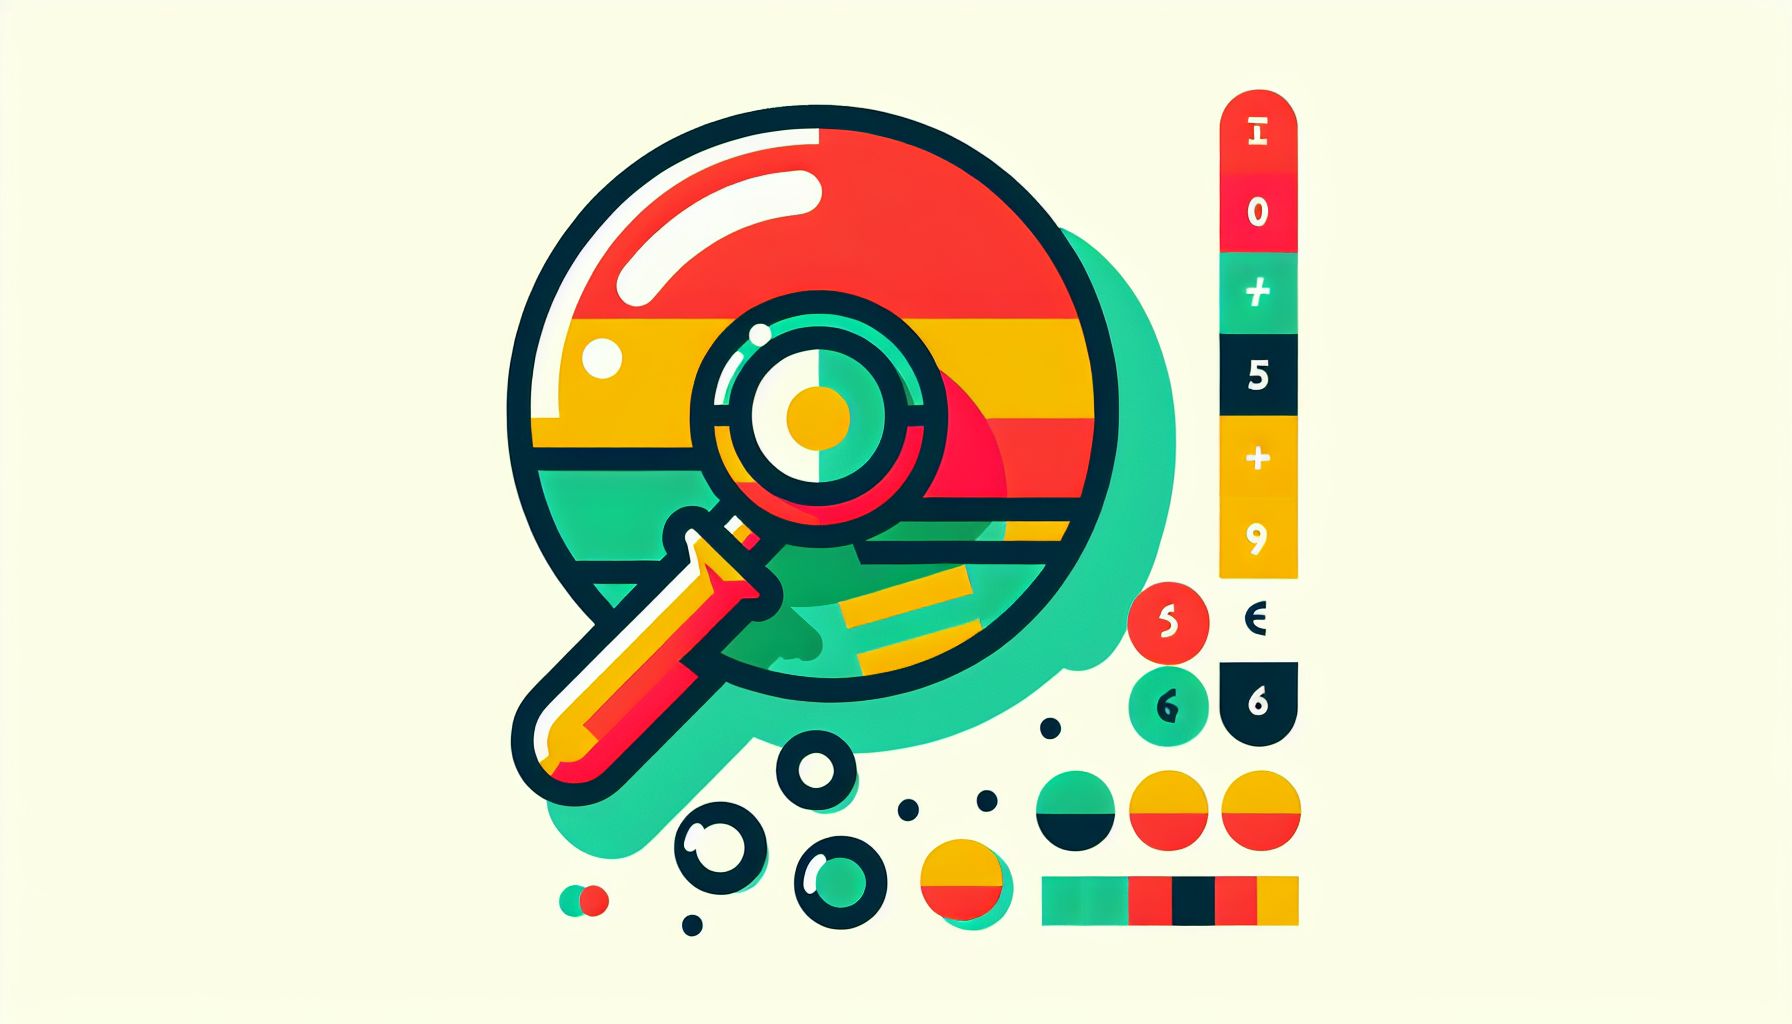 Magnifying Glass in flat illustration style and white background, red #f47574, green #88c7a8, yellow #fcc44b, and blue #645bc8 colors.